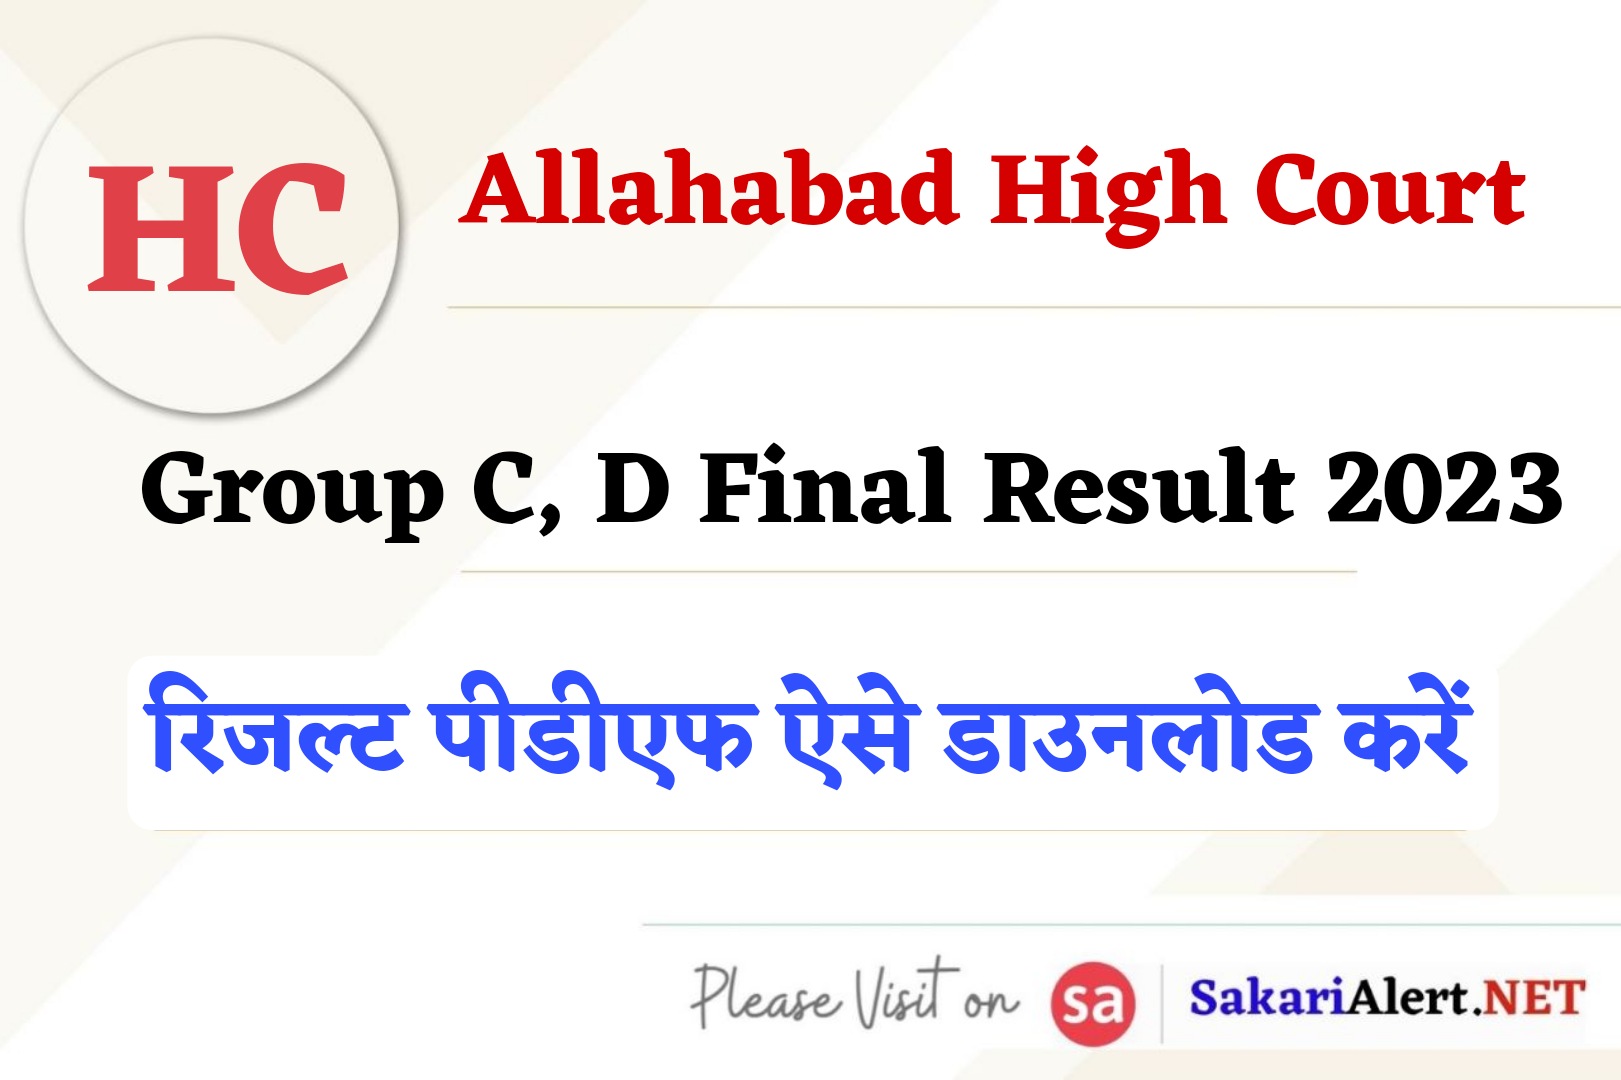 Allahabad High Court Group C, D Various Post Score Card 2023